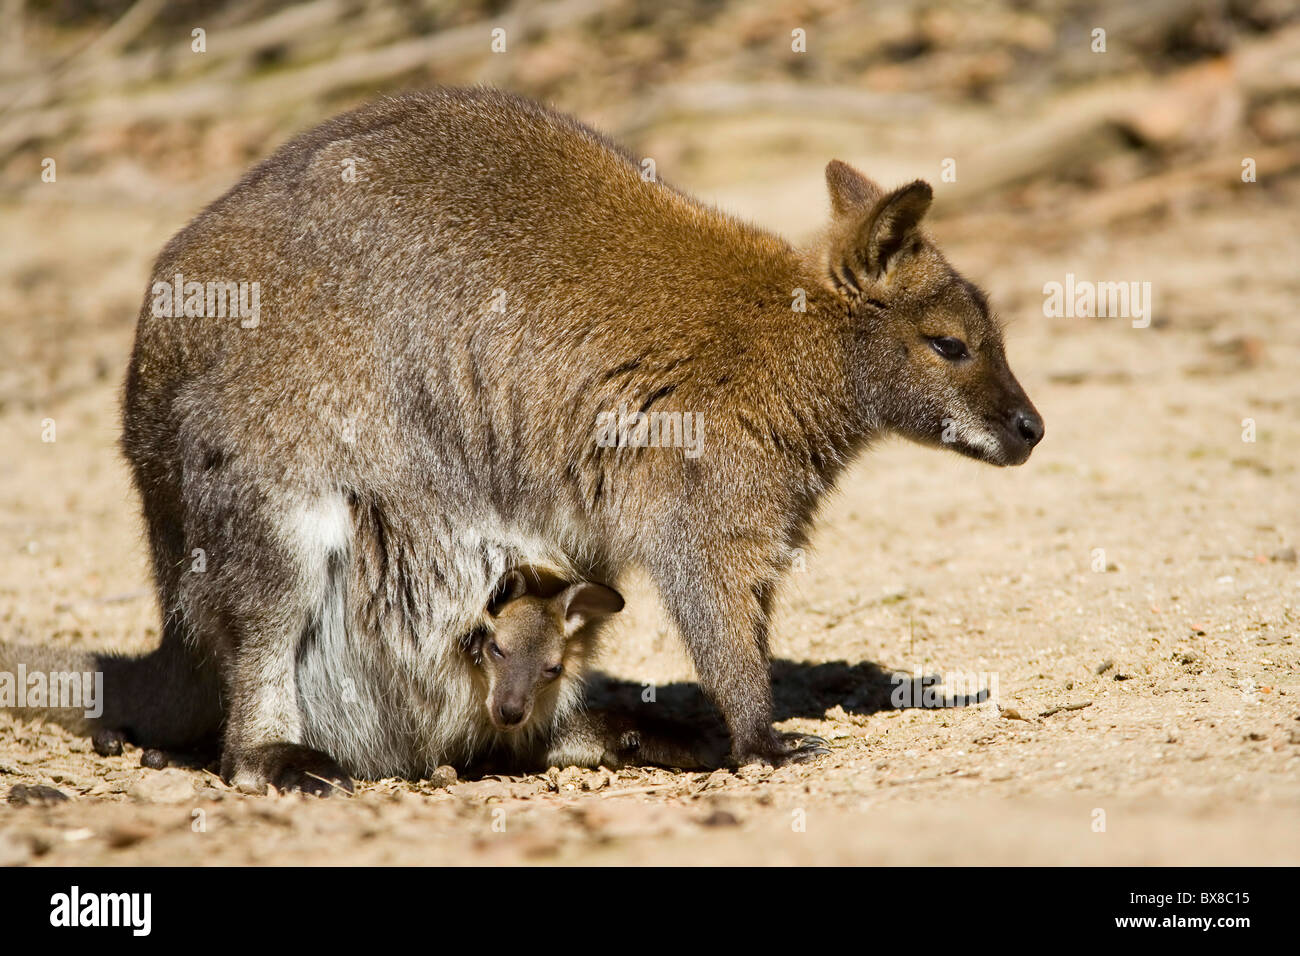 the Red necked wallaby in pouch by mother (Macropus rufogrisens, Wallabia rufogrisea) Stock Photo